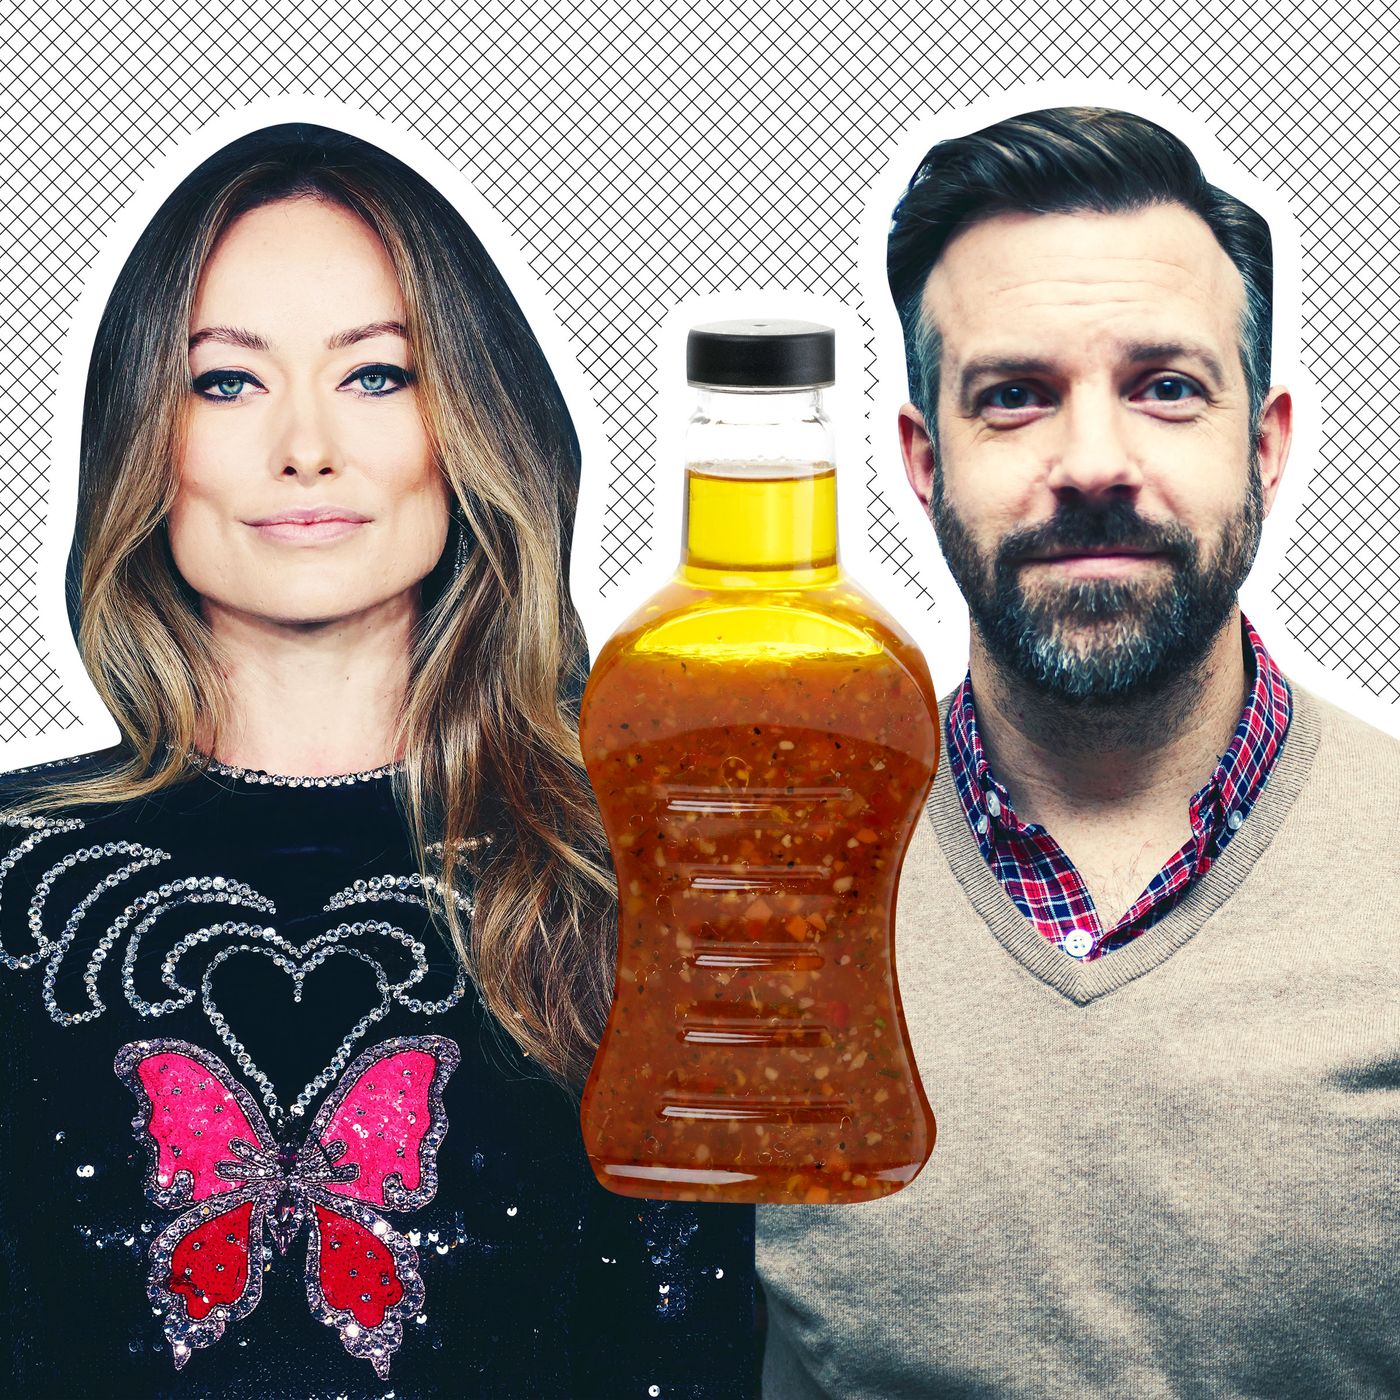 Here It Is: The Salad Dressing Recipe Olivia Wilde Shared With